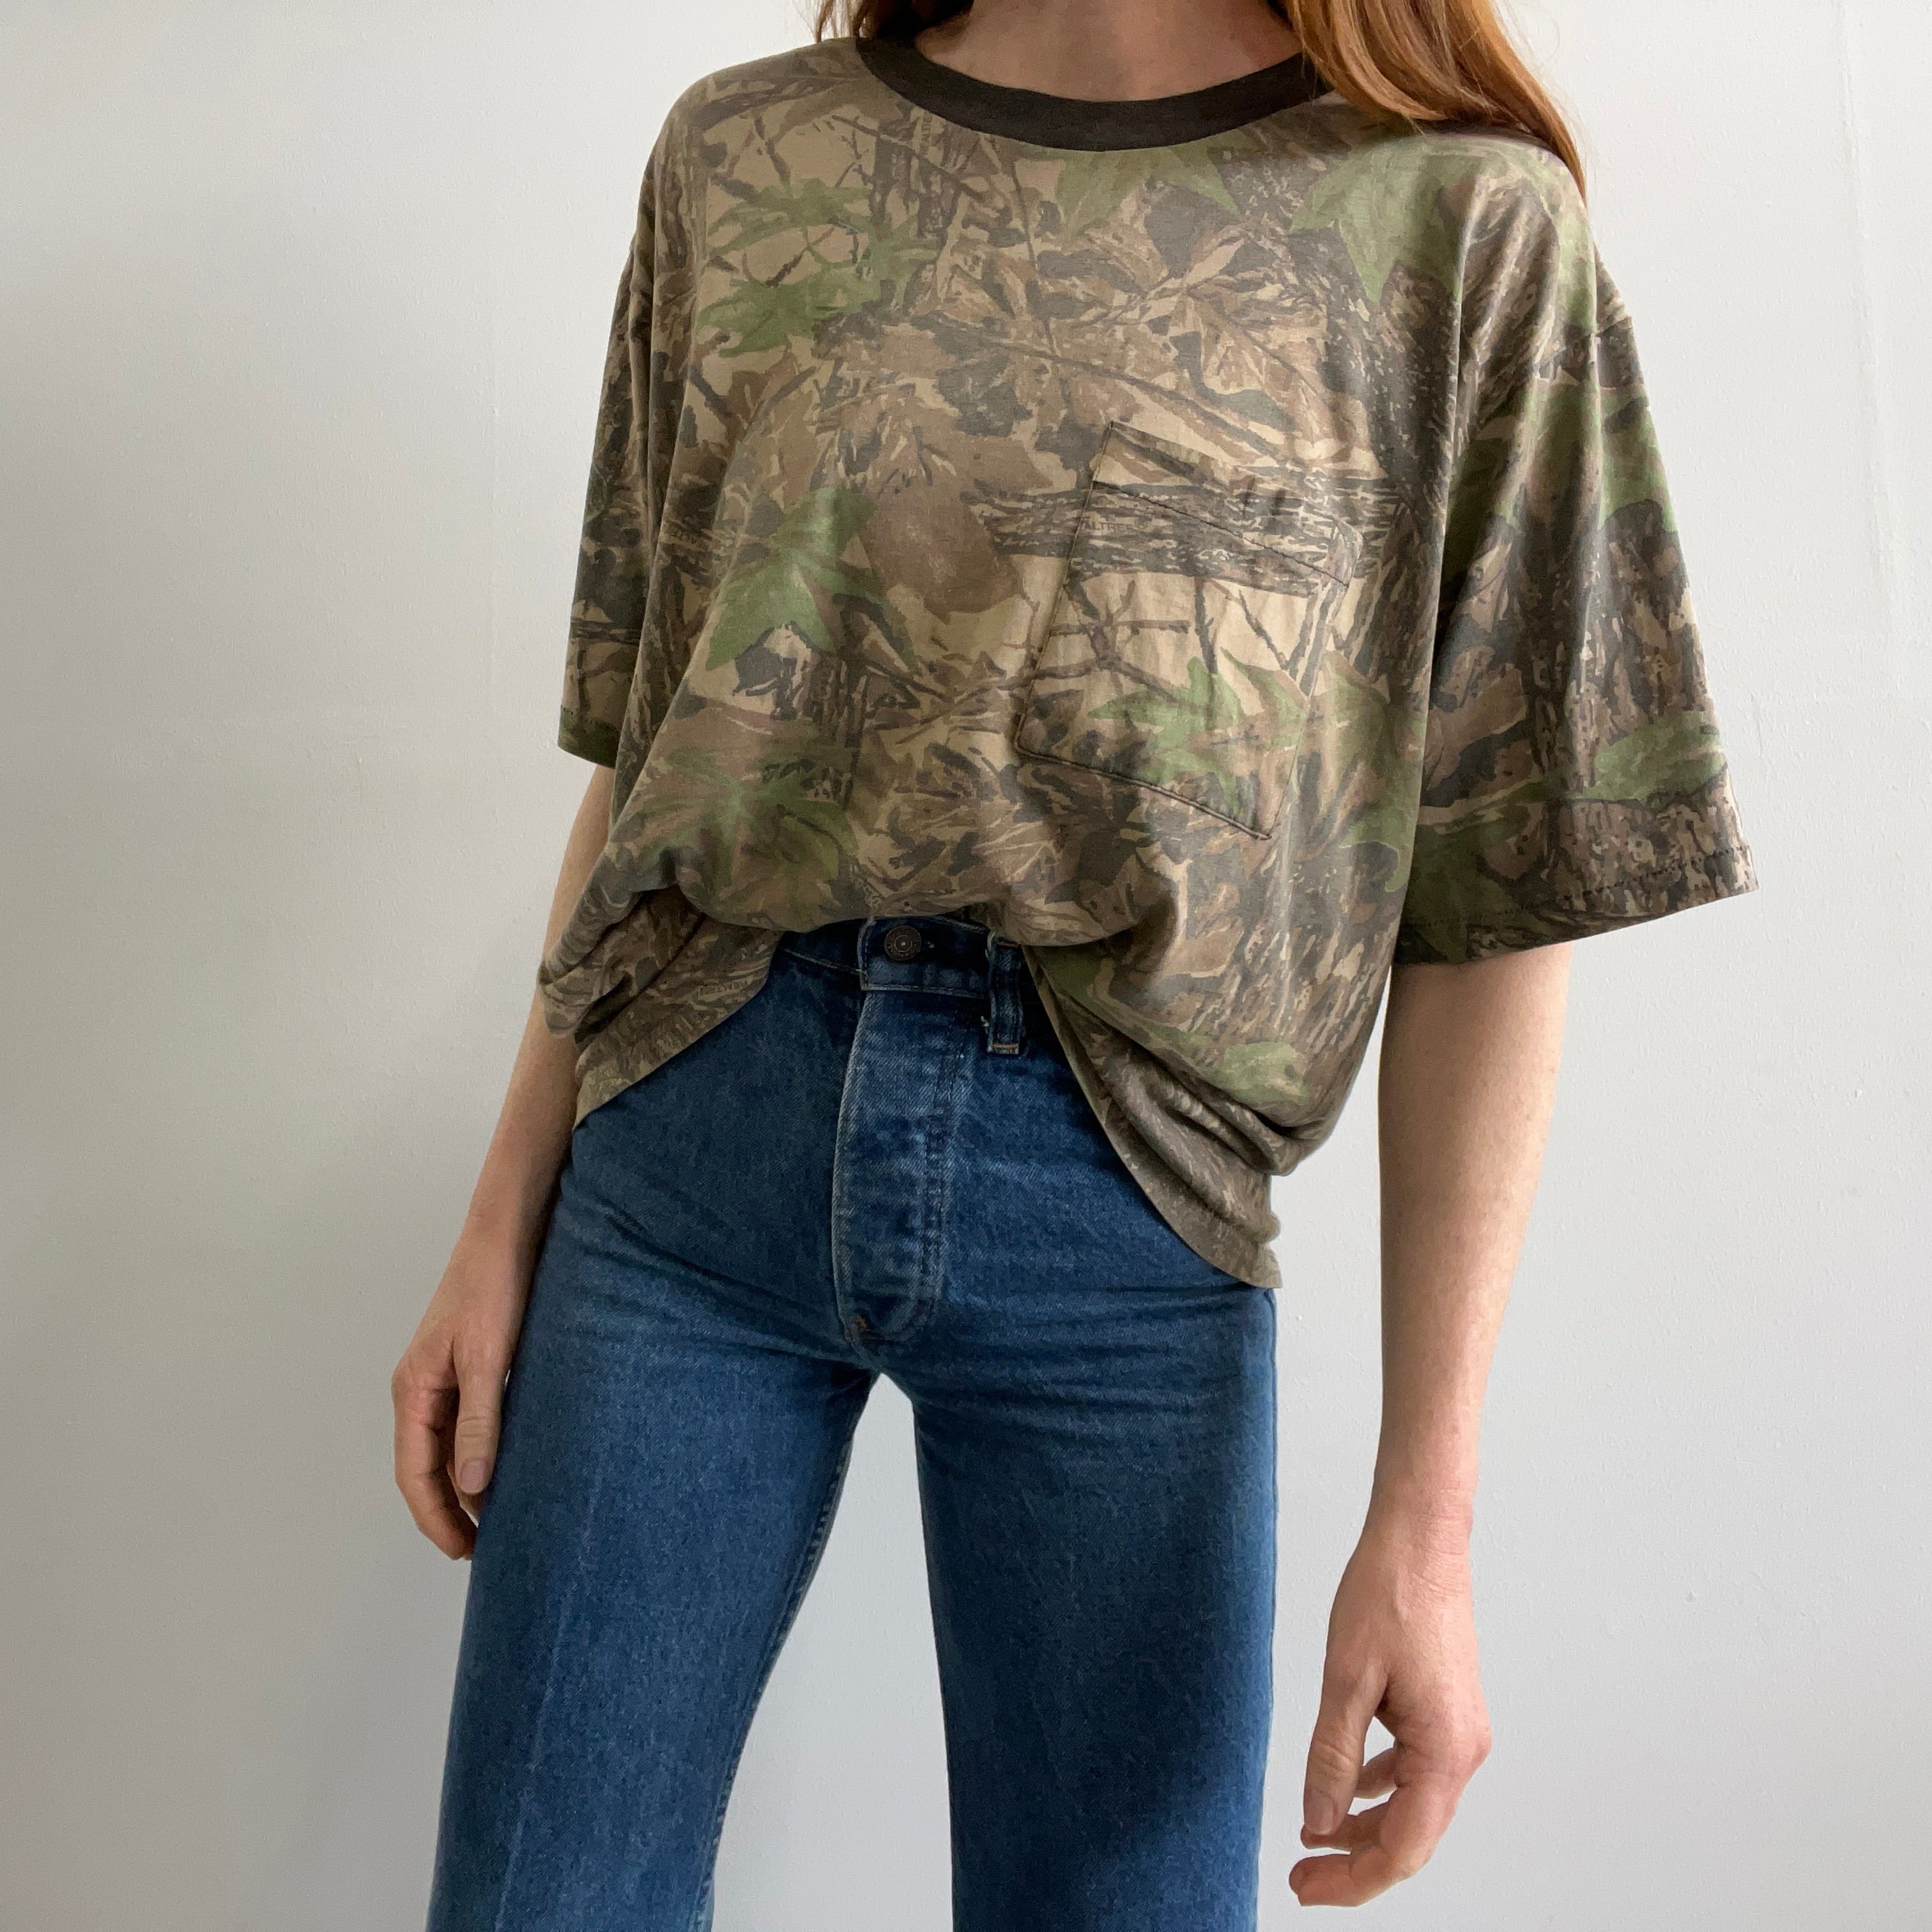 1980/90s Super Thin, Soft and Slouchy Tree Camo T-Shirt